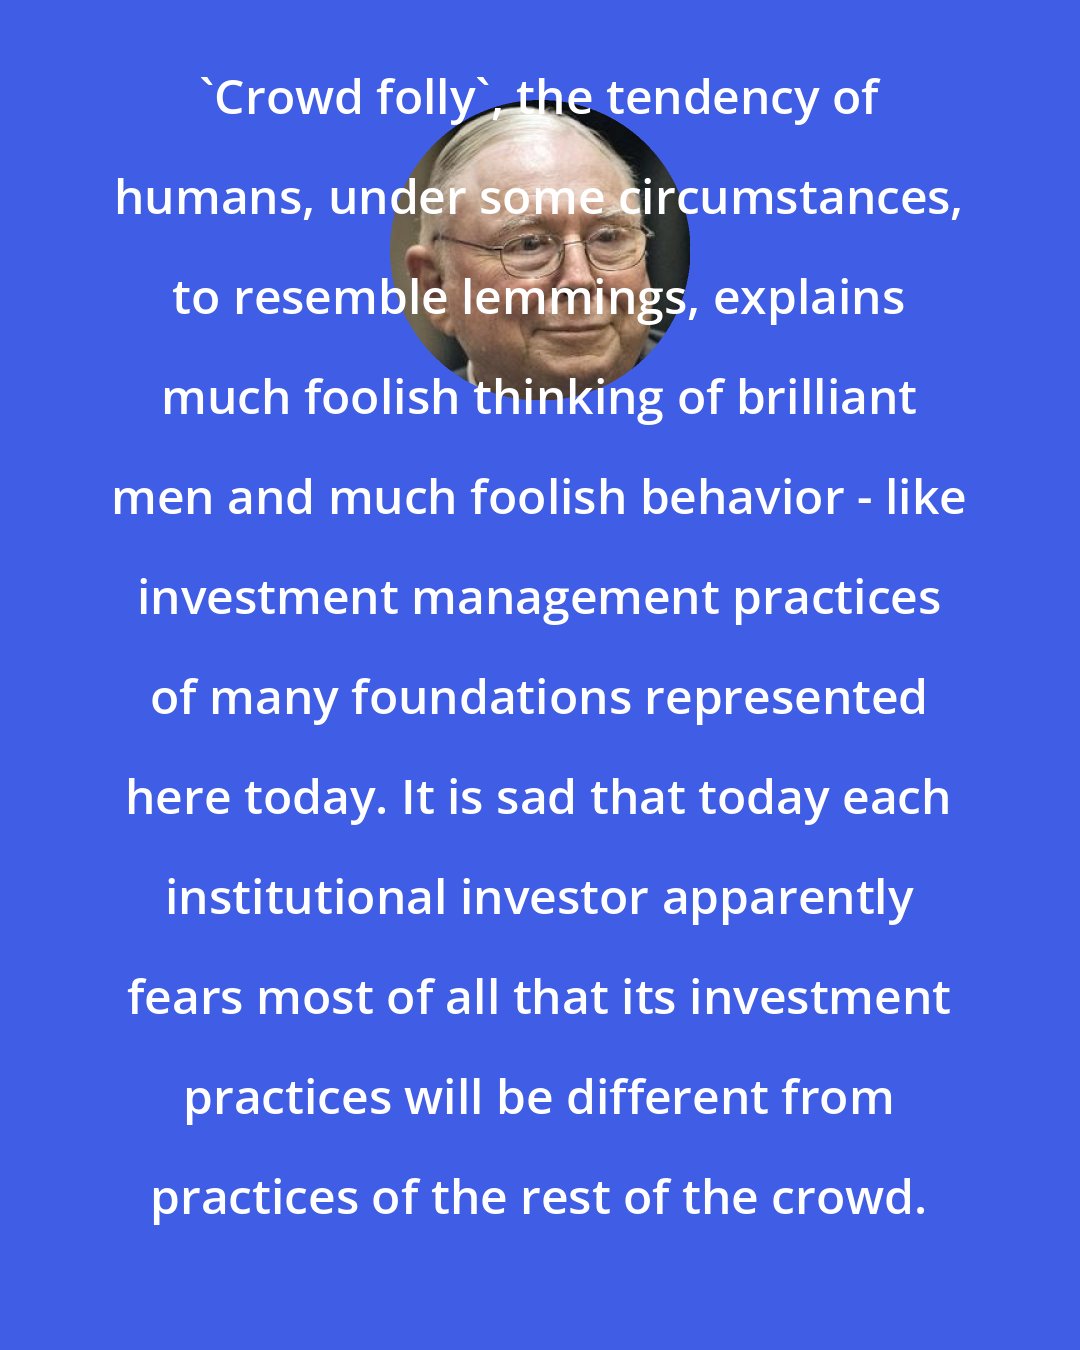 Charlie Munger: 'Crowd folly', the tendency of humans, under some circumstances, to resemble lemmings, explains much foolish thinking of brilliant men and much foolish behavior - like investment management practices of many foundations represented here today. It is sad that today each institutional investor apparently fears most of all that its investment practices will be different from practices of the rest of the crowd.